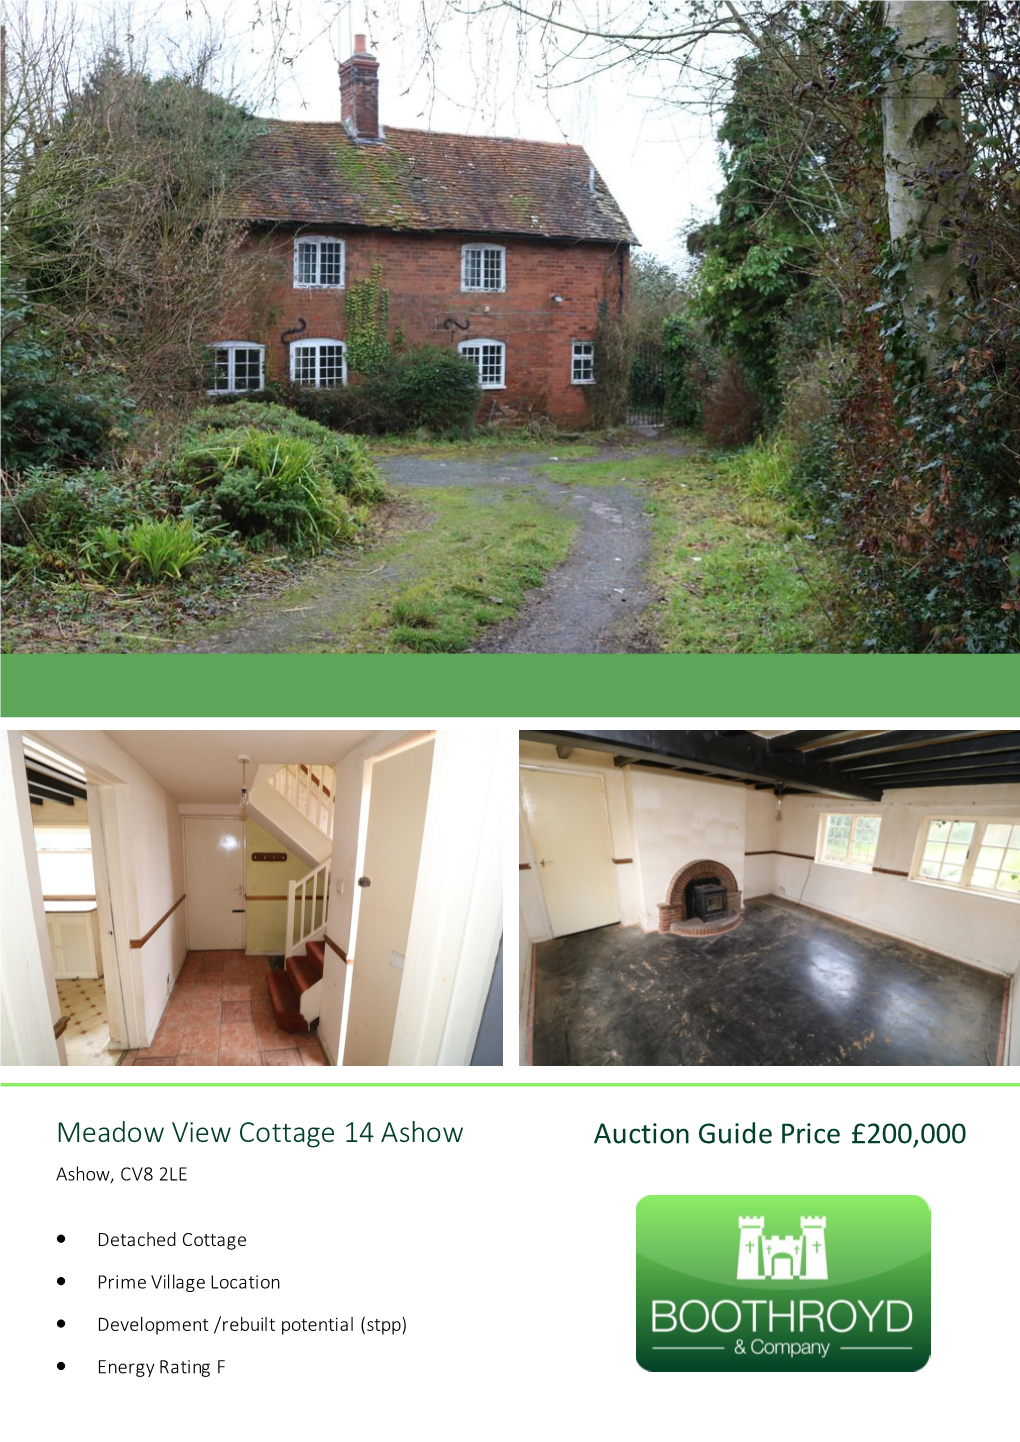 Auction Guide Price £200,000 Meadow View Cottage 14 Ashow